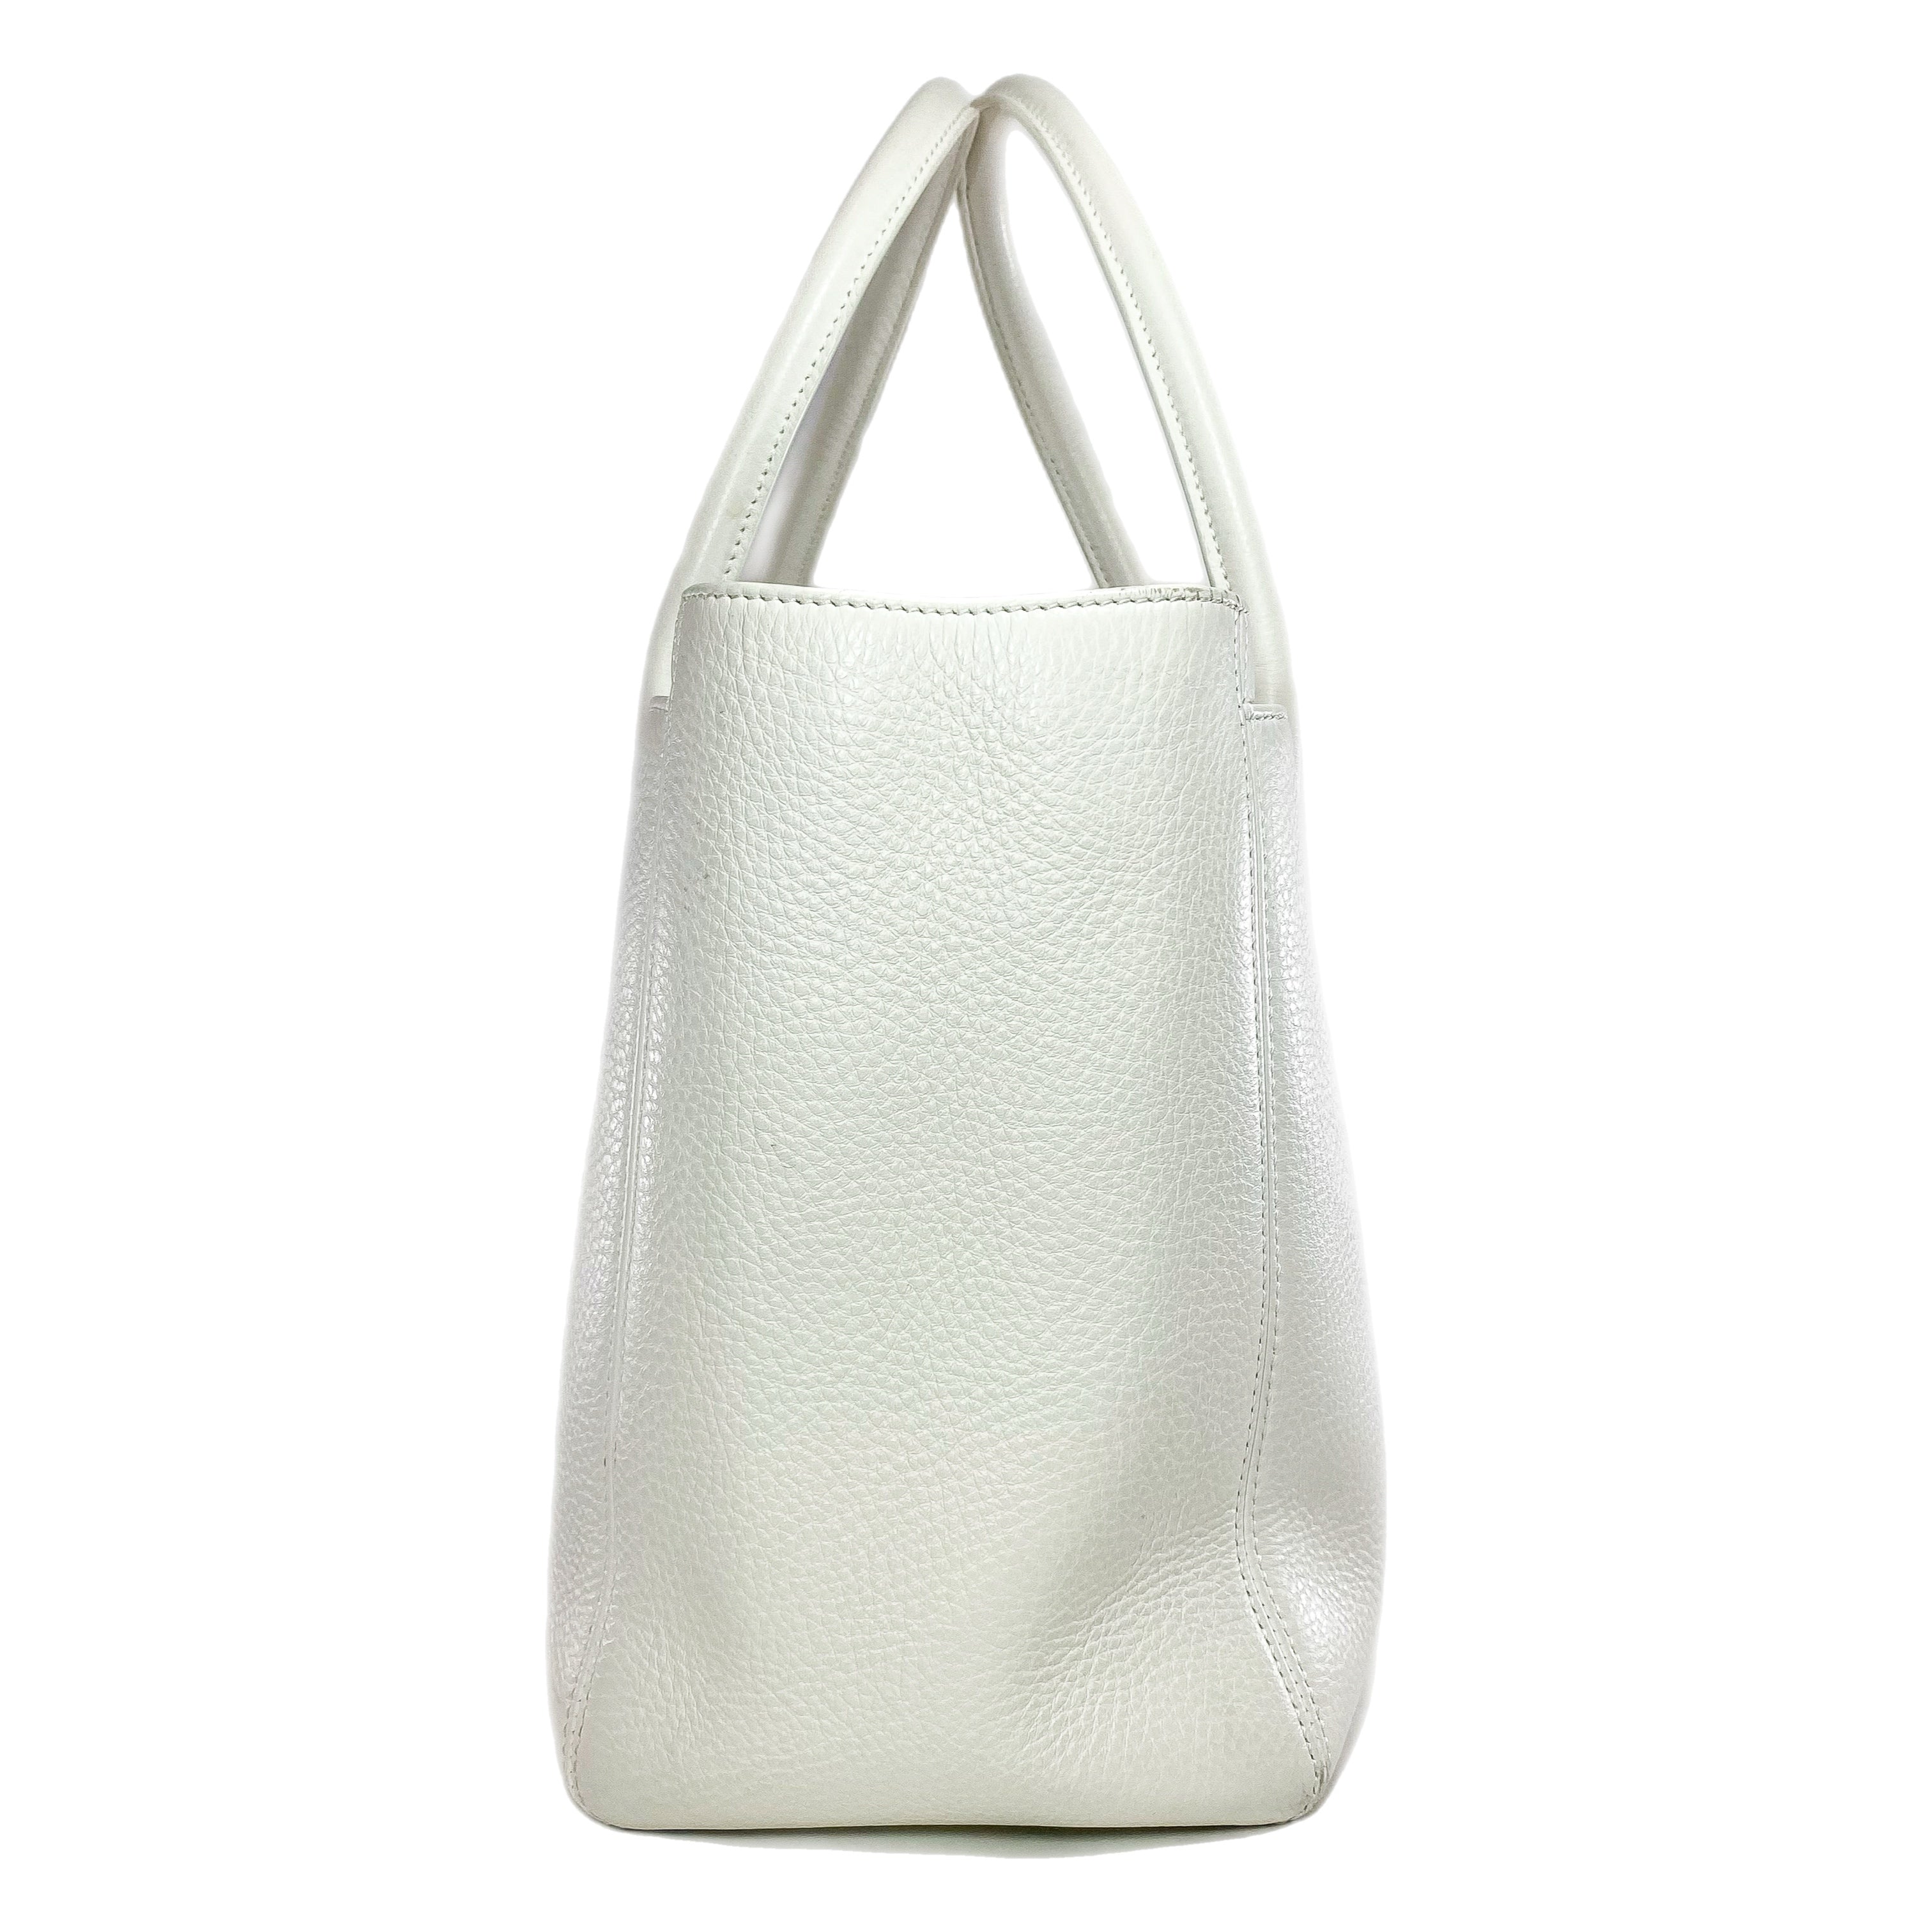 Chanel White Executive Cerf Tote Bag